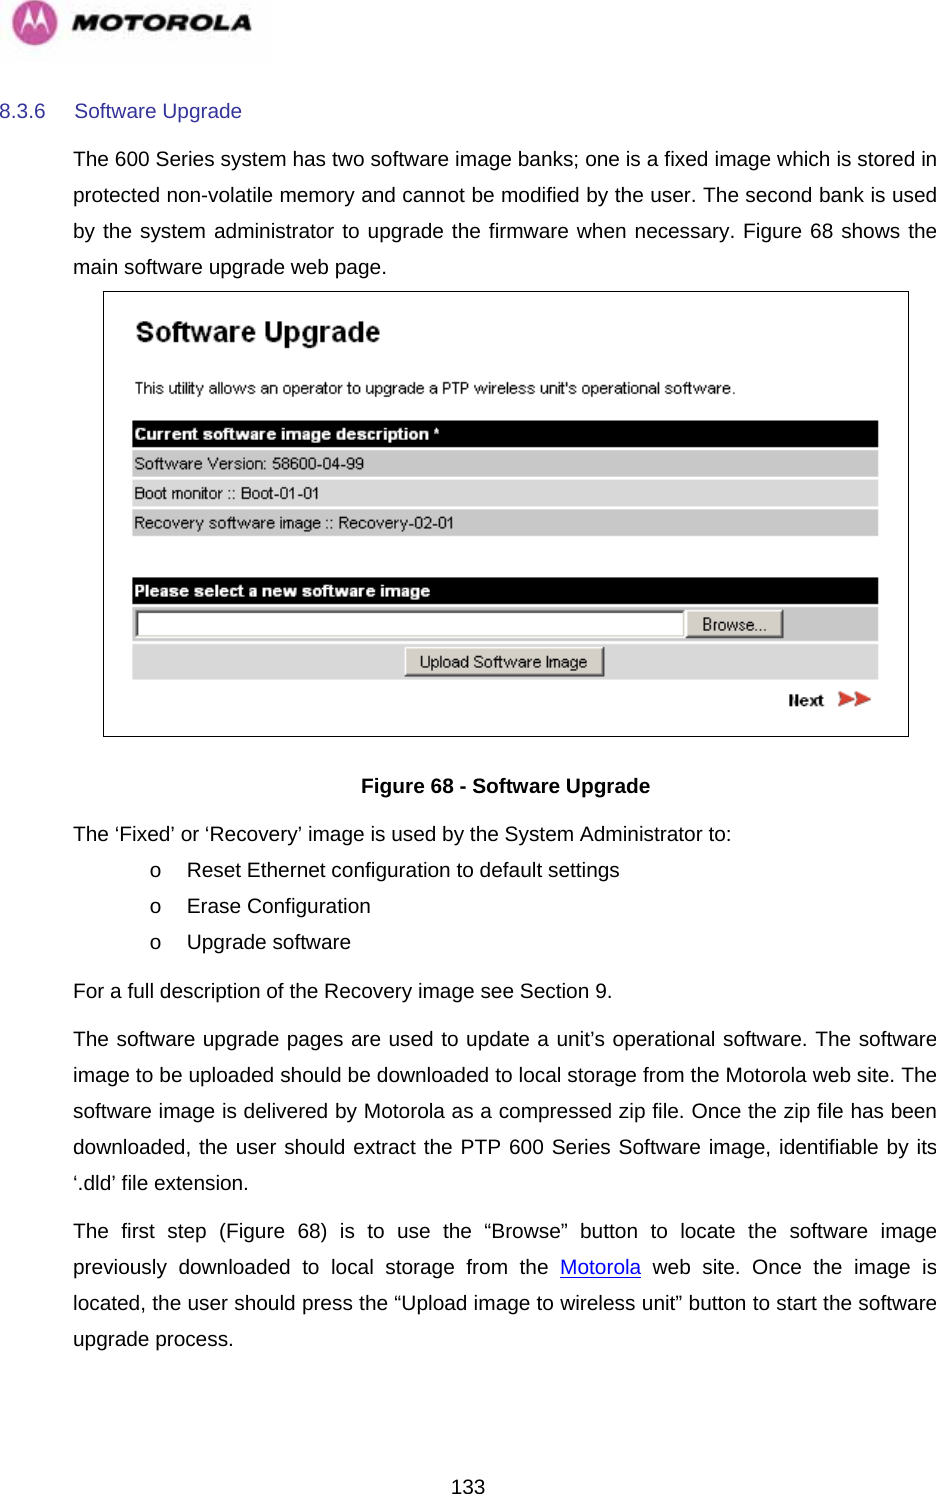   1338.3.6 Software Upgrade The 600 Series system has two software image banks; one is a fixed image which is stored in protected non-volatile memory and cannot be modified by the user. The second bank is used by the system administrator to upgrade the firmware when necessary. Figure 68 shows the main software upgrade web page.  Figure 68 - Software Upgrade The ‘Fixed’ or ‘Recovery’ image is used by the System Administrator to: o  Reset Ethernet configuration to default settings o Erase Configuration o Upgrade software For a full description of the Recovery image see Section 9. The software upgrade pages are used to update a unit’s operational software. The software image to be uploaded should be downloaded to local storage from the Motorola web site. The software image is delivered by Motorola as a compressed zip file. Once the zip file has been downloaded, the user should extract the PTP 600 Series Software image, identifiable by its ‘.dld’ file extension. The first step (Figure 68) is to use the “Browse” button to locate the software image previously downloaded to local storage from the Motorola web site. Once the image is located, the user should press the “Upload image to wireless unit” button to start the software upgrade process.   